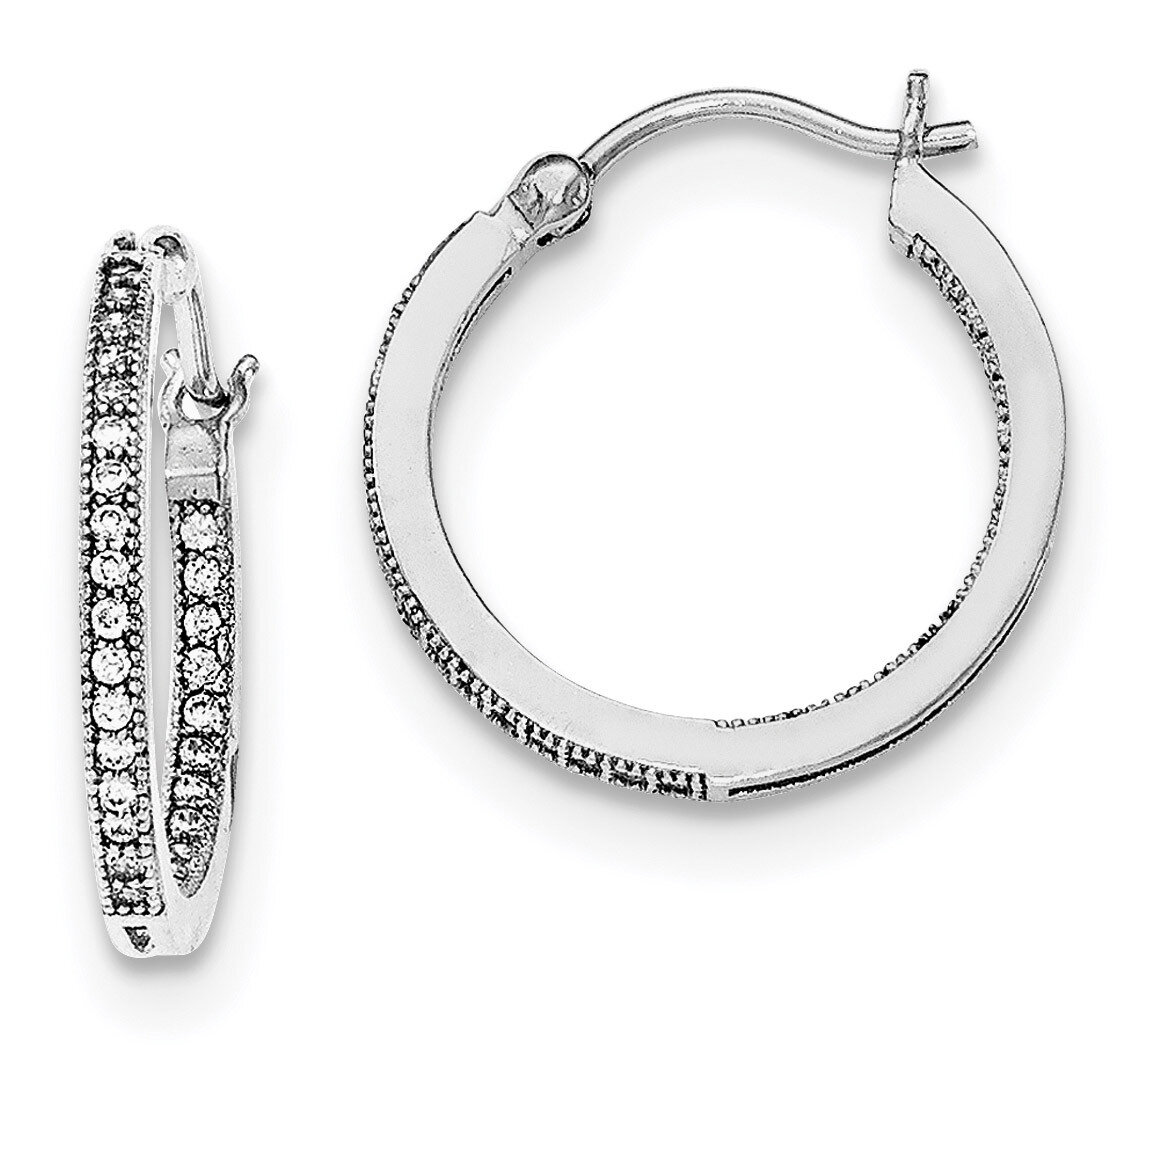 CZ Diamond 15mm In &amp; Out Hoop Earrings Sterling Silver Rhodium-plated QE12272